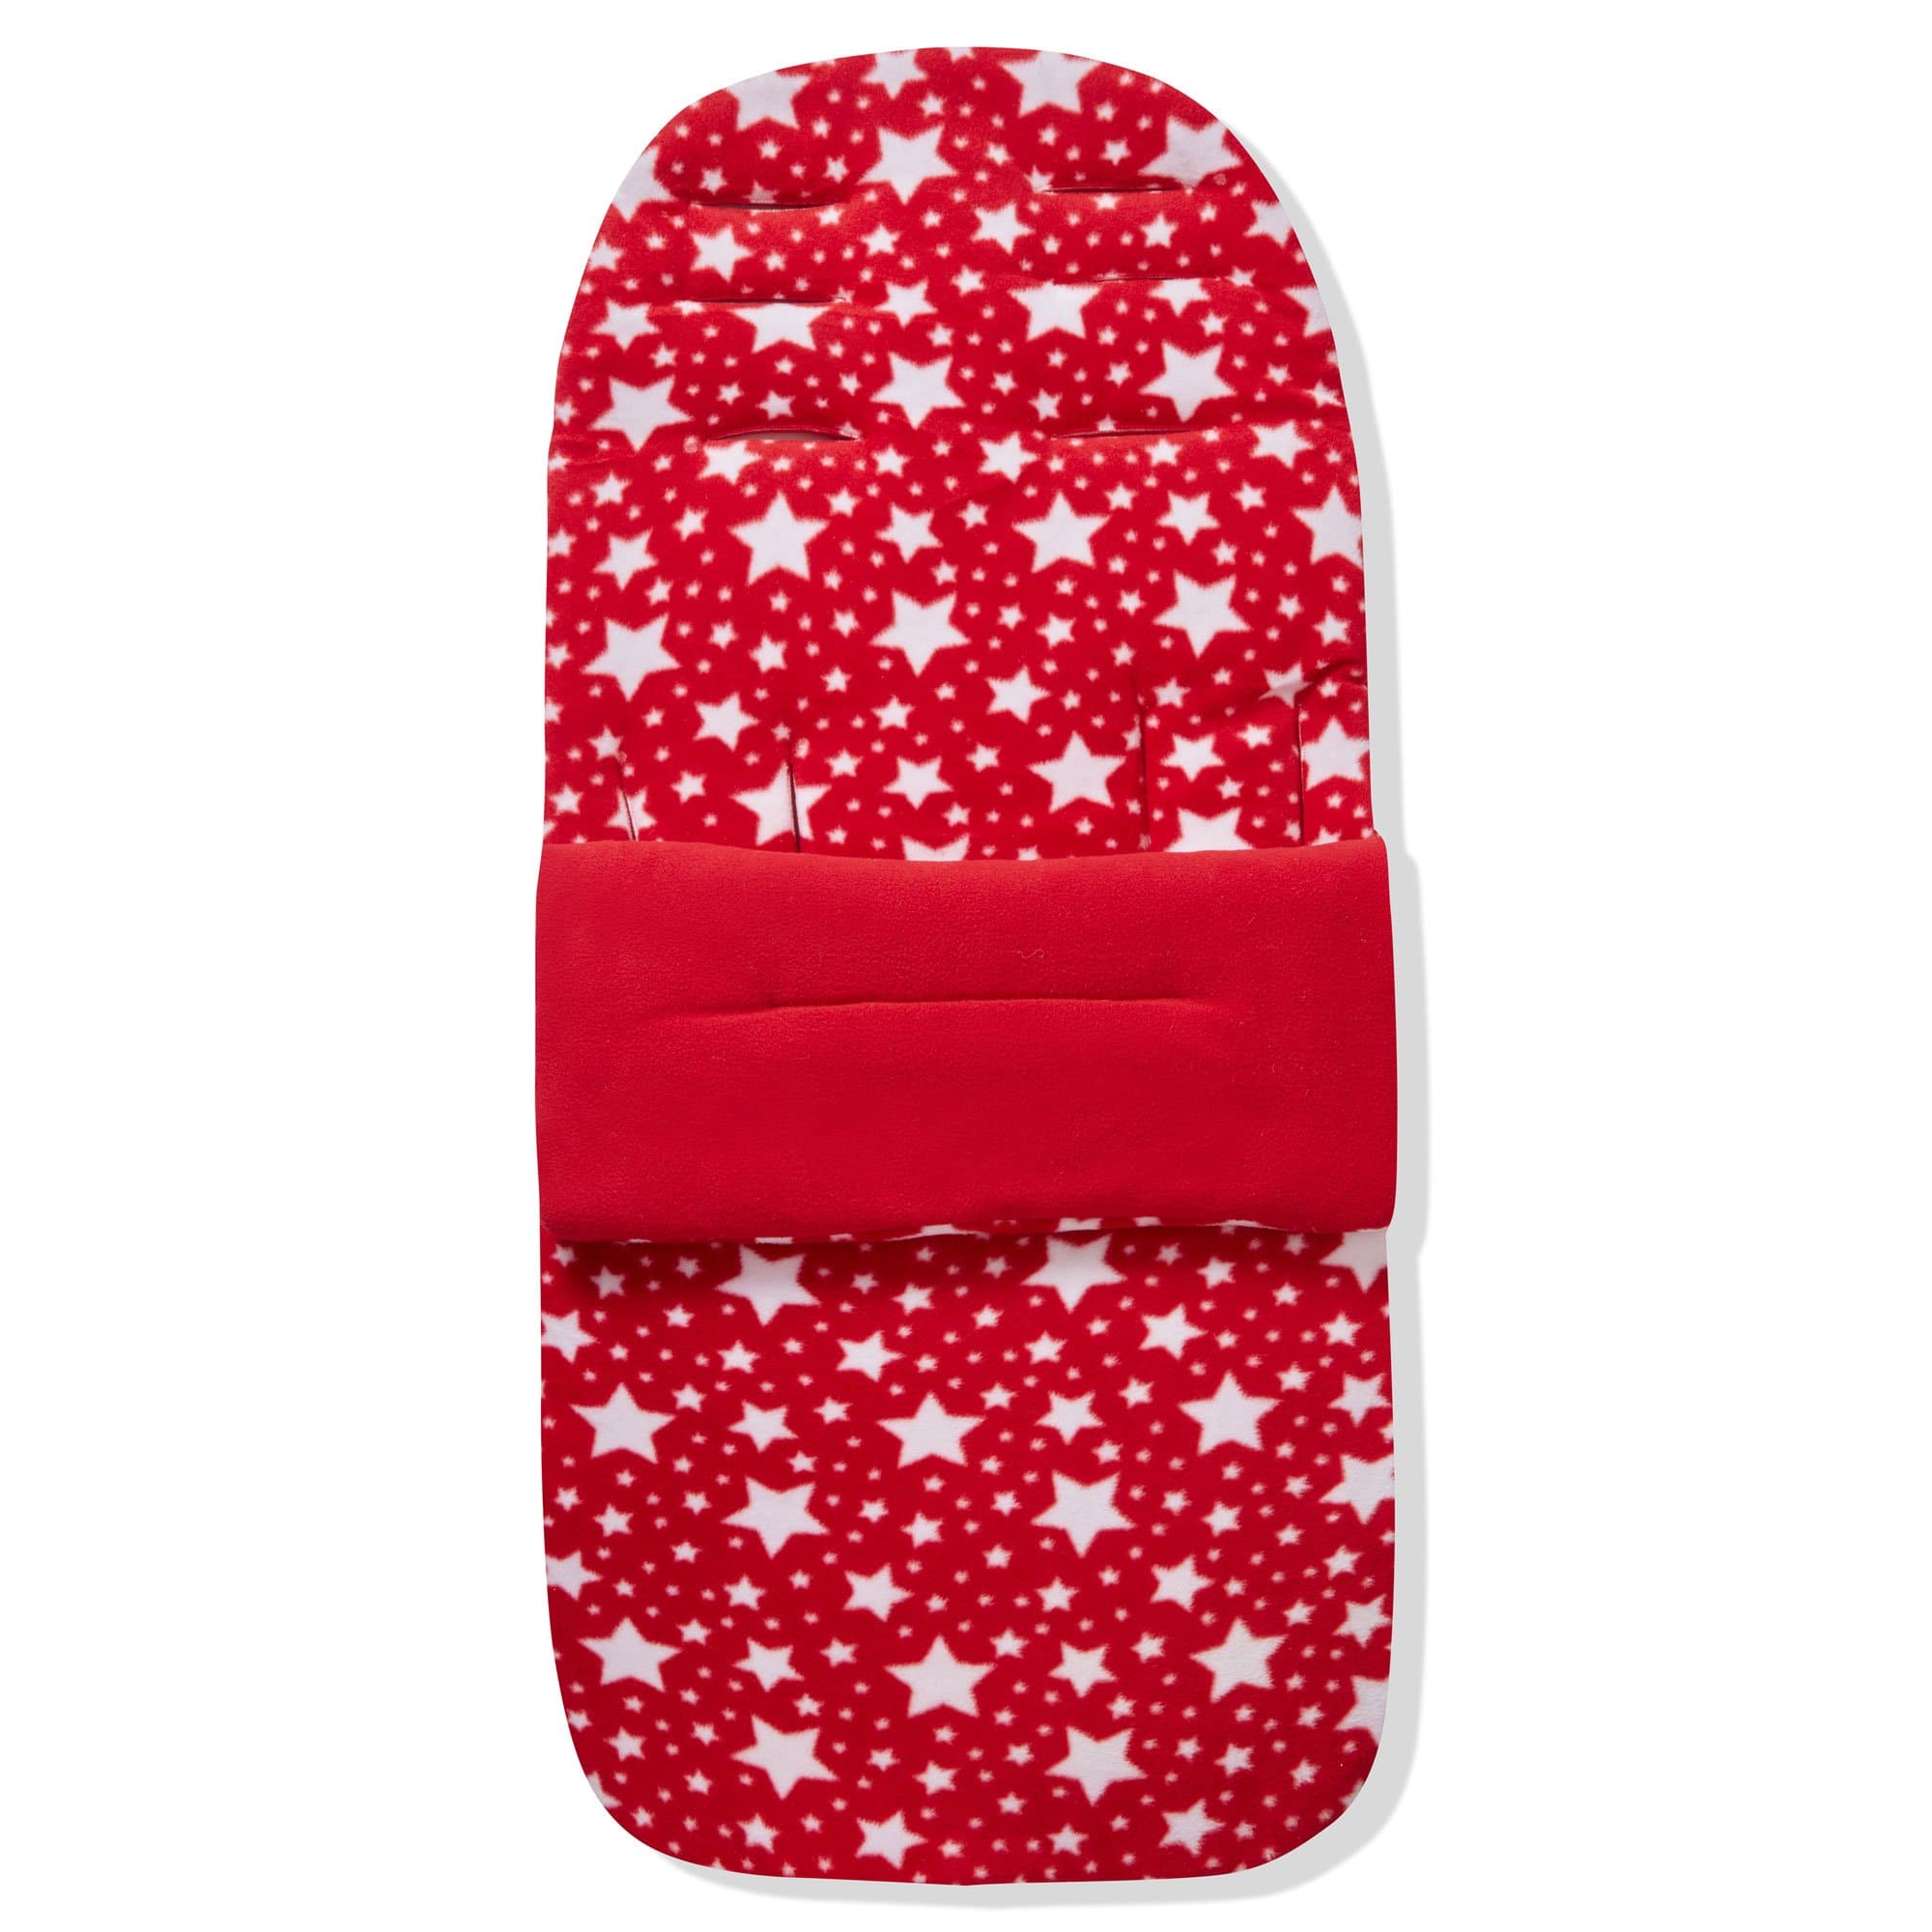 Fleece Footmuff / Cosy Toes Compatible with Babywelt - Red Star / Fits All Models | For Your Little One